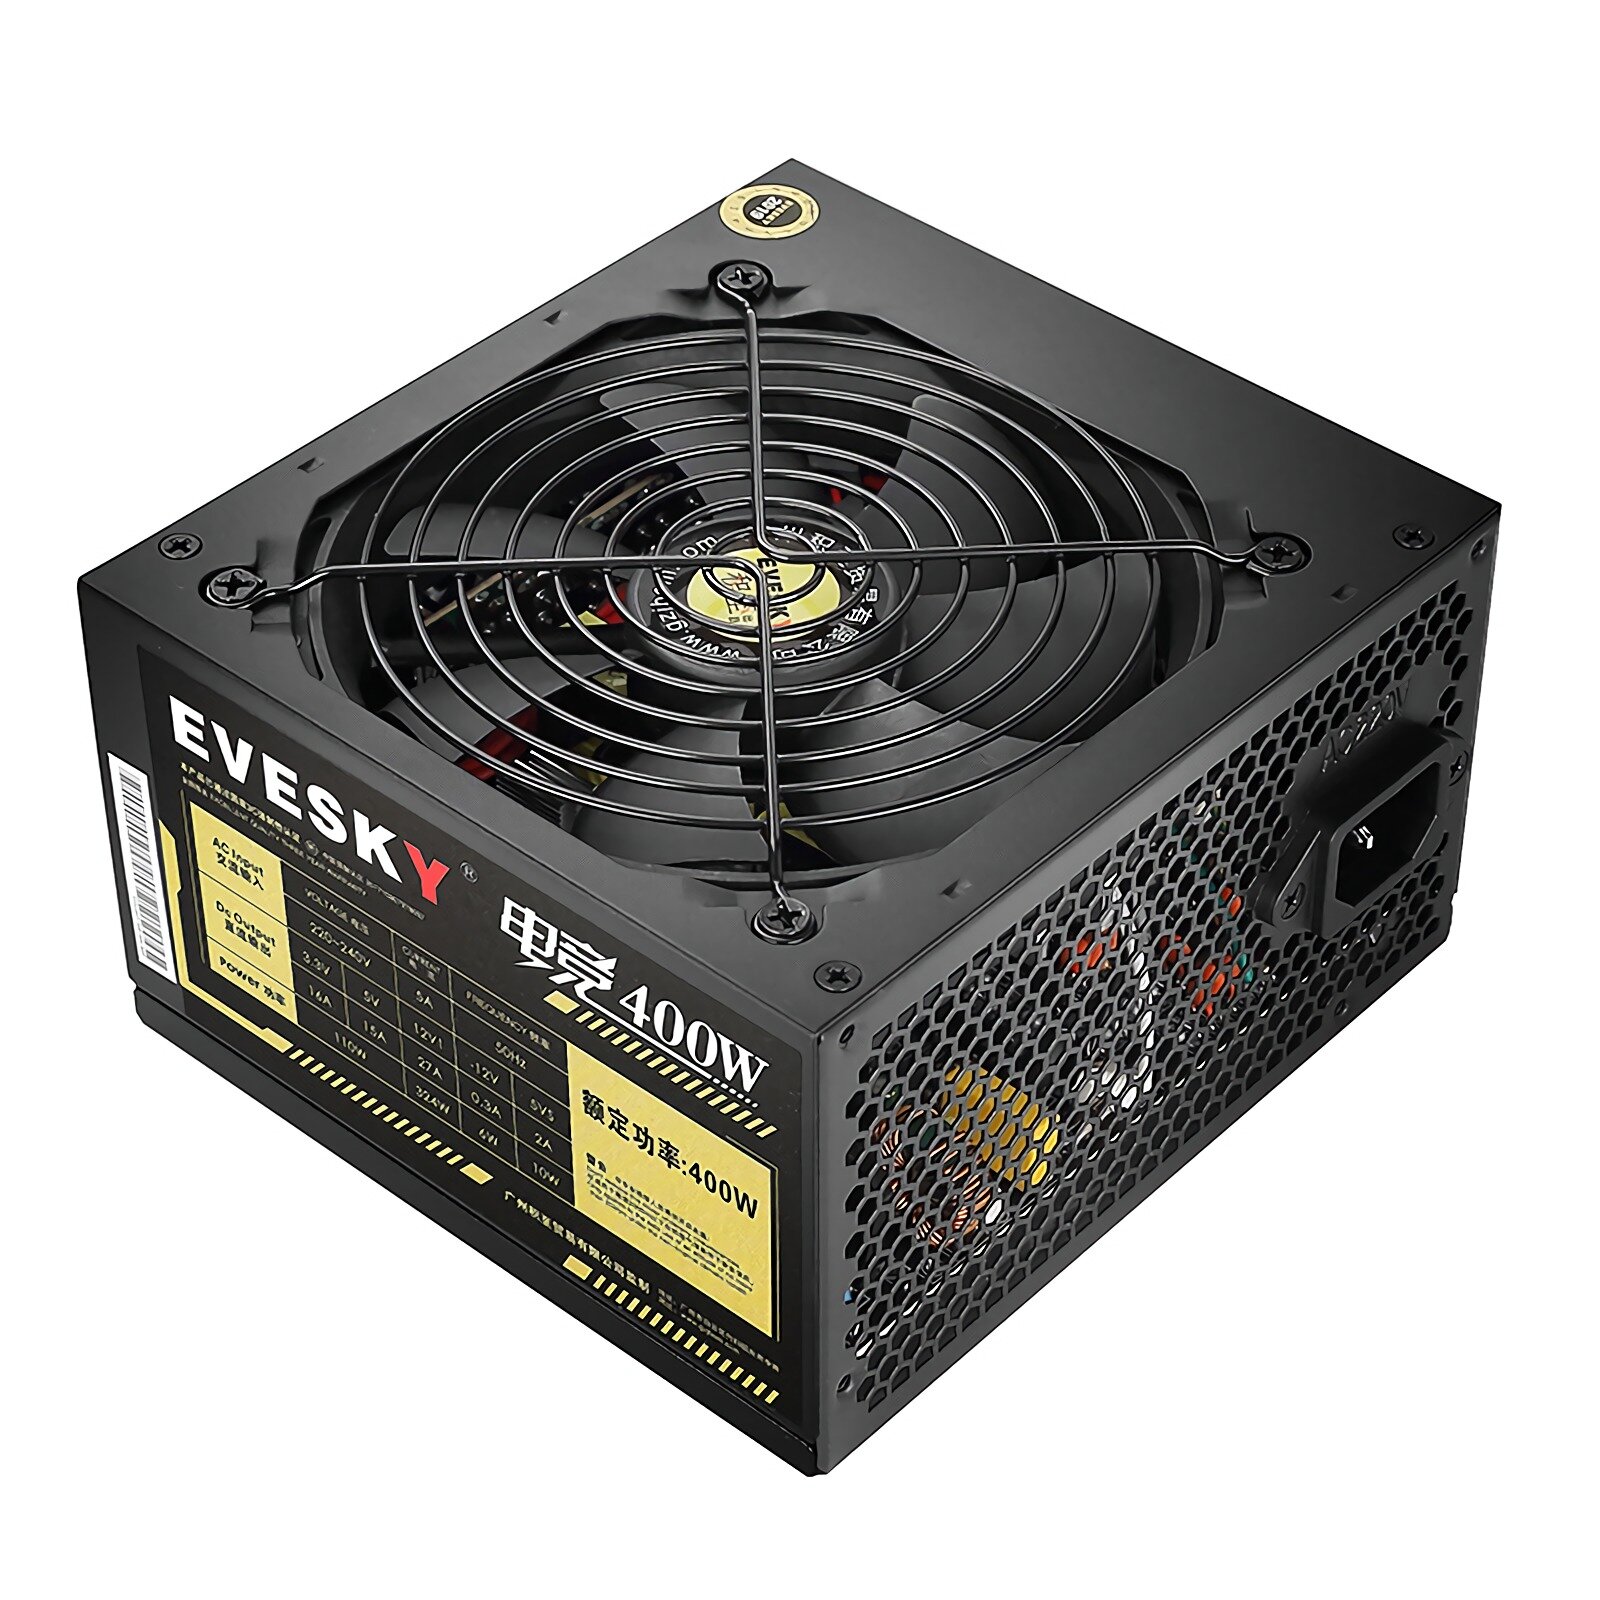 

EVESKY 400W Gaming Power Supply 12CM Fan Computer Host Power Supply Rated 400W For Video Card